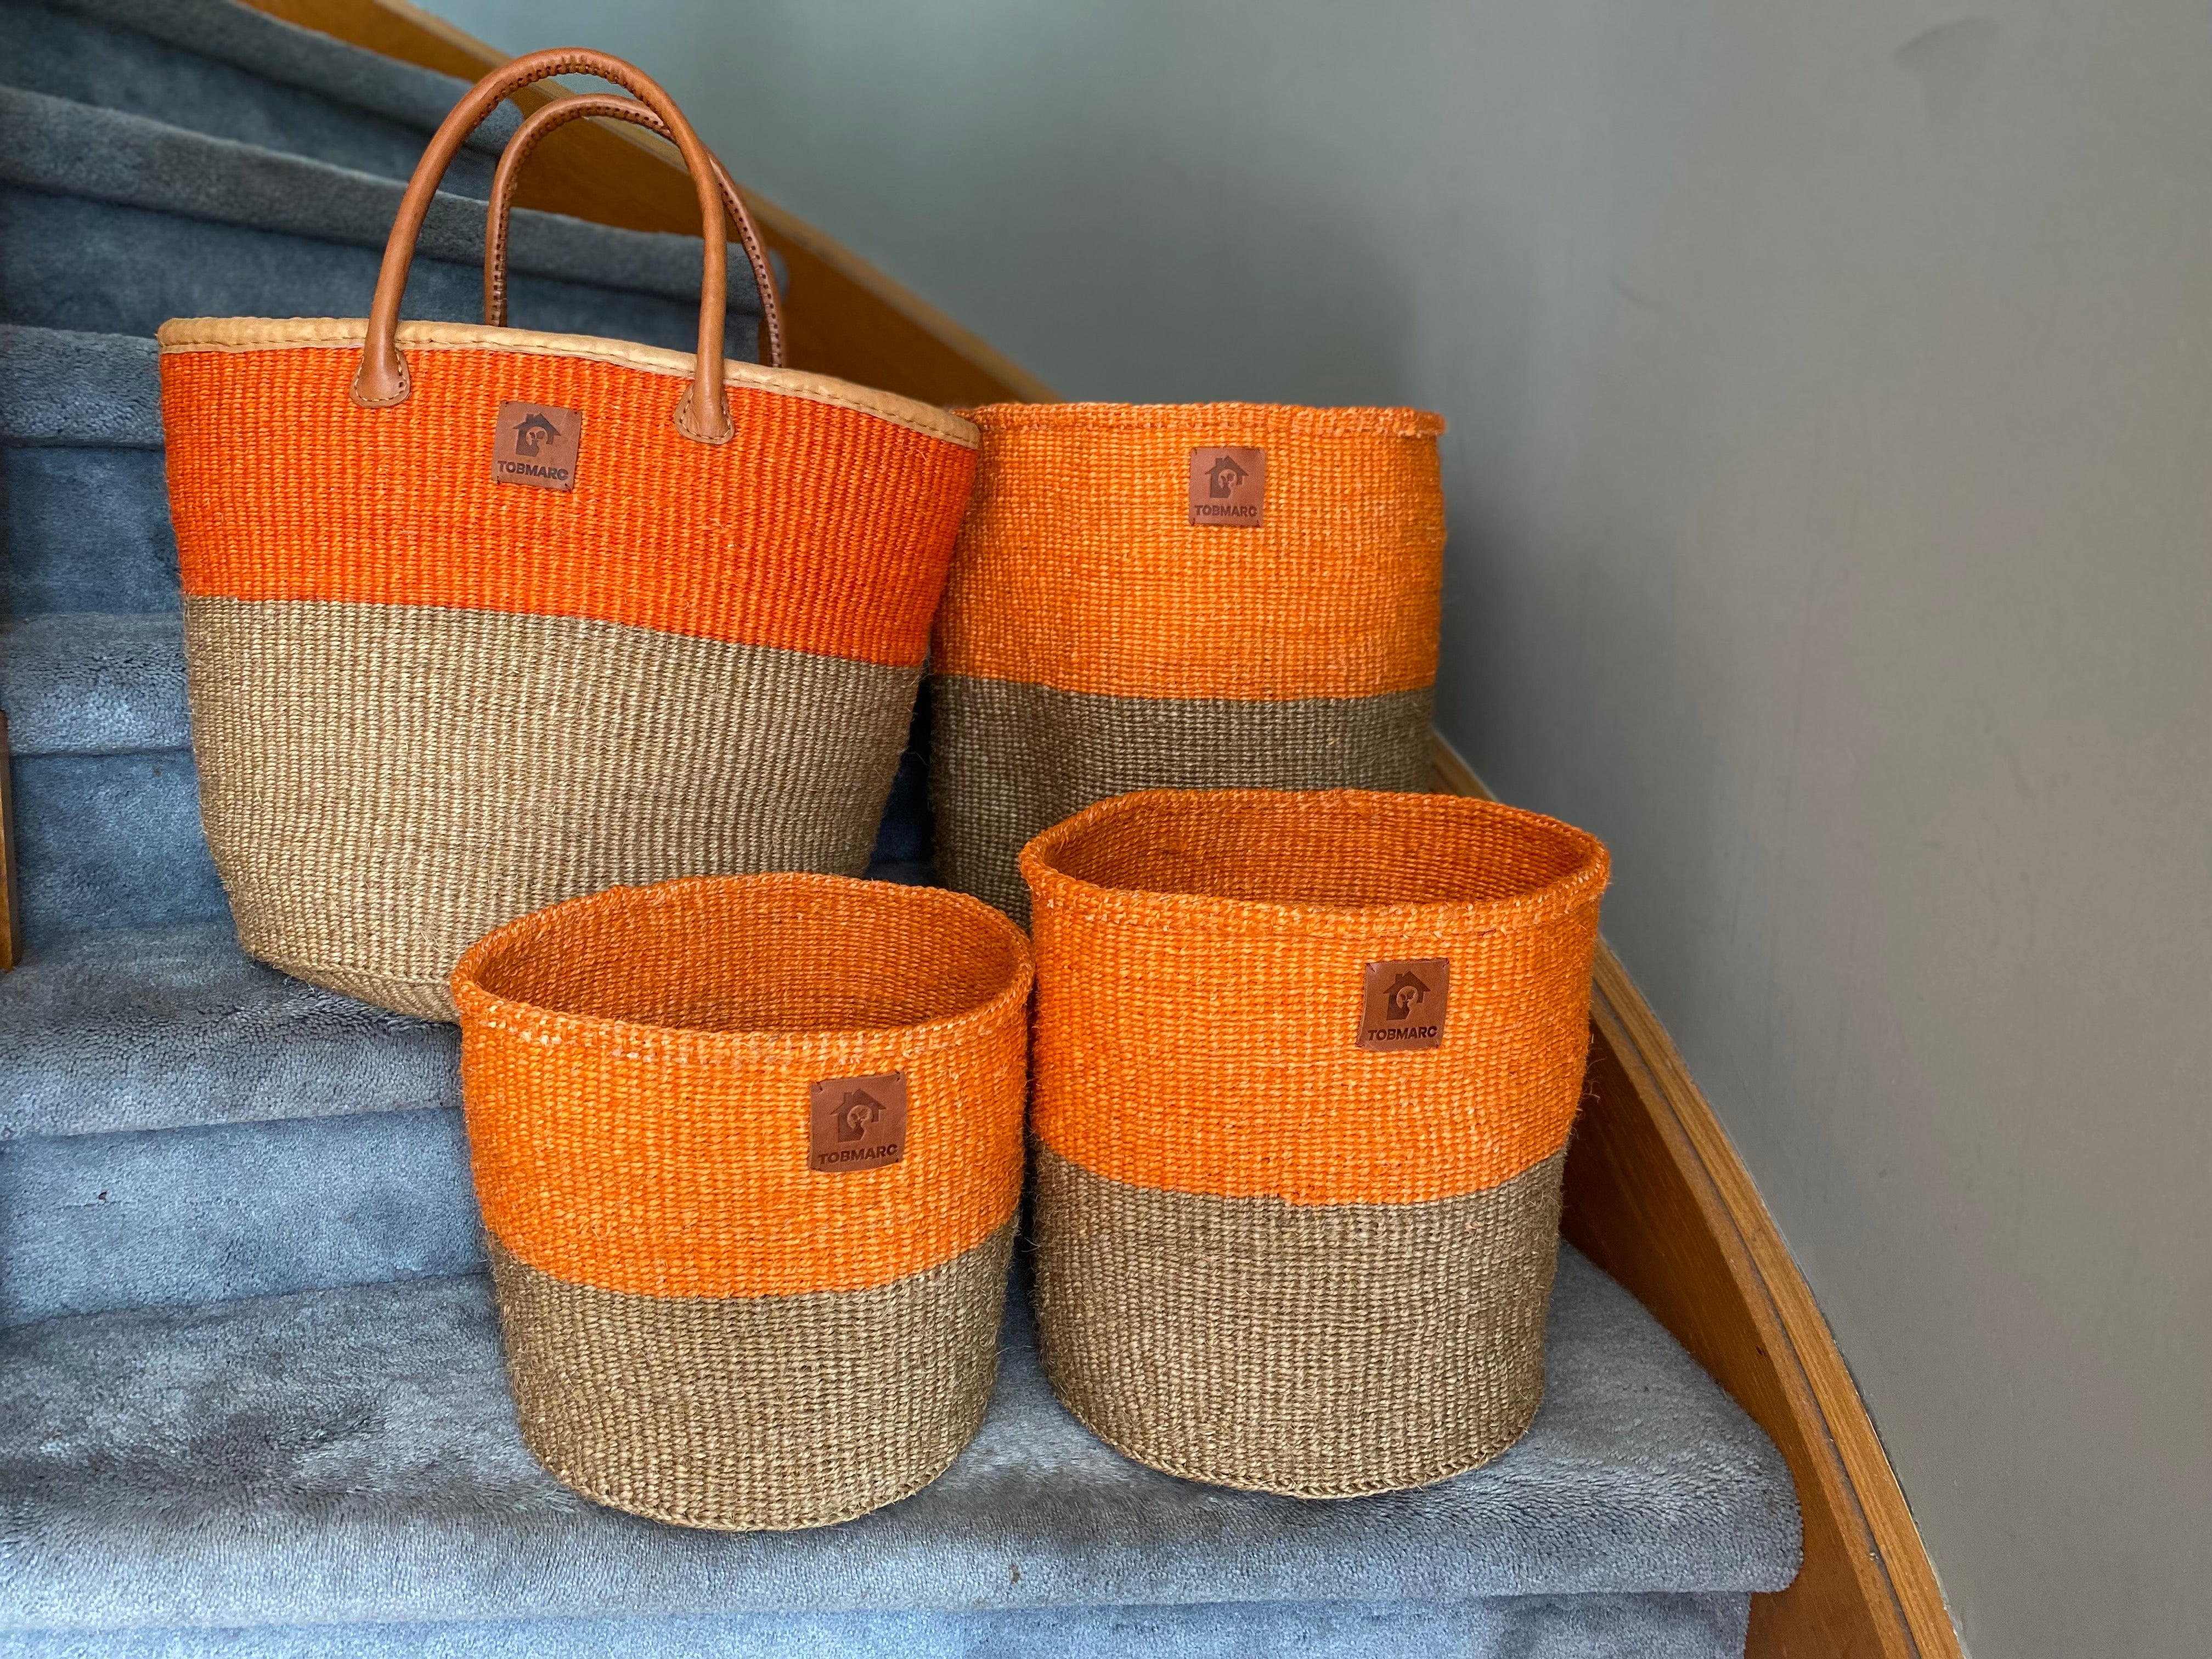 Two-Tone Storage Baskets, Plant Baskets, African Basket Planters, Laundry Basket, Toy Storage Baskets - Tobmarc Home Decor & Gifts 